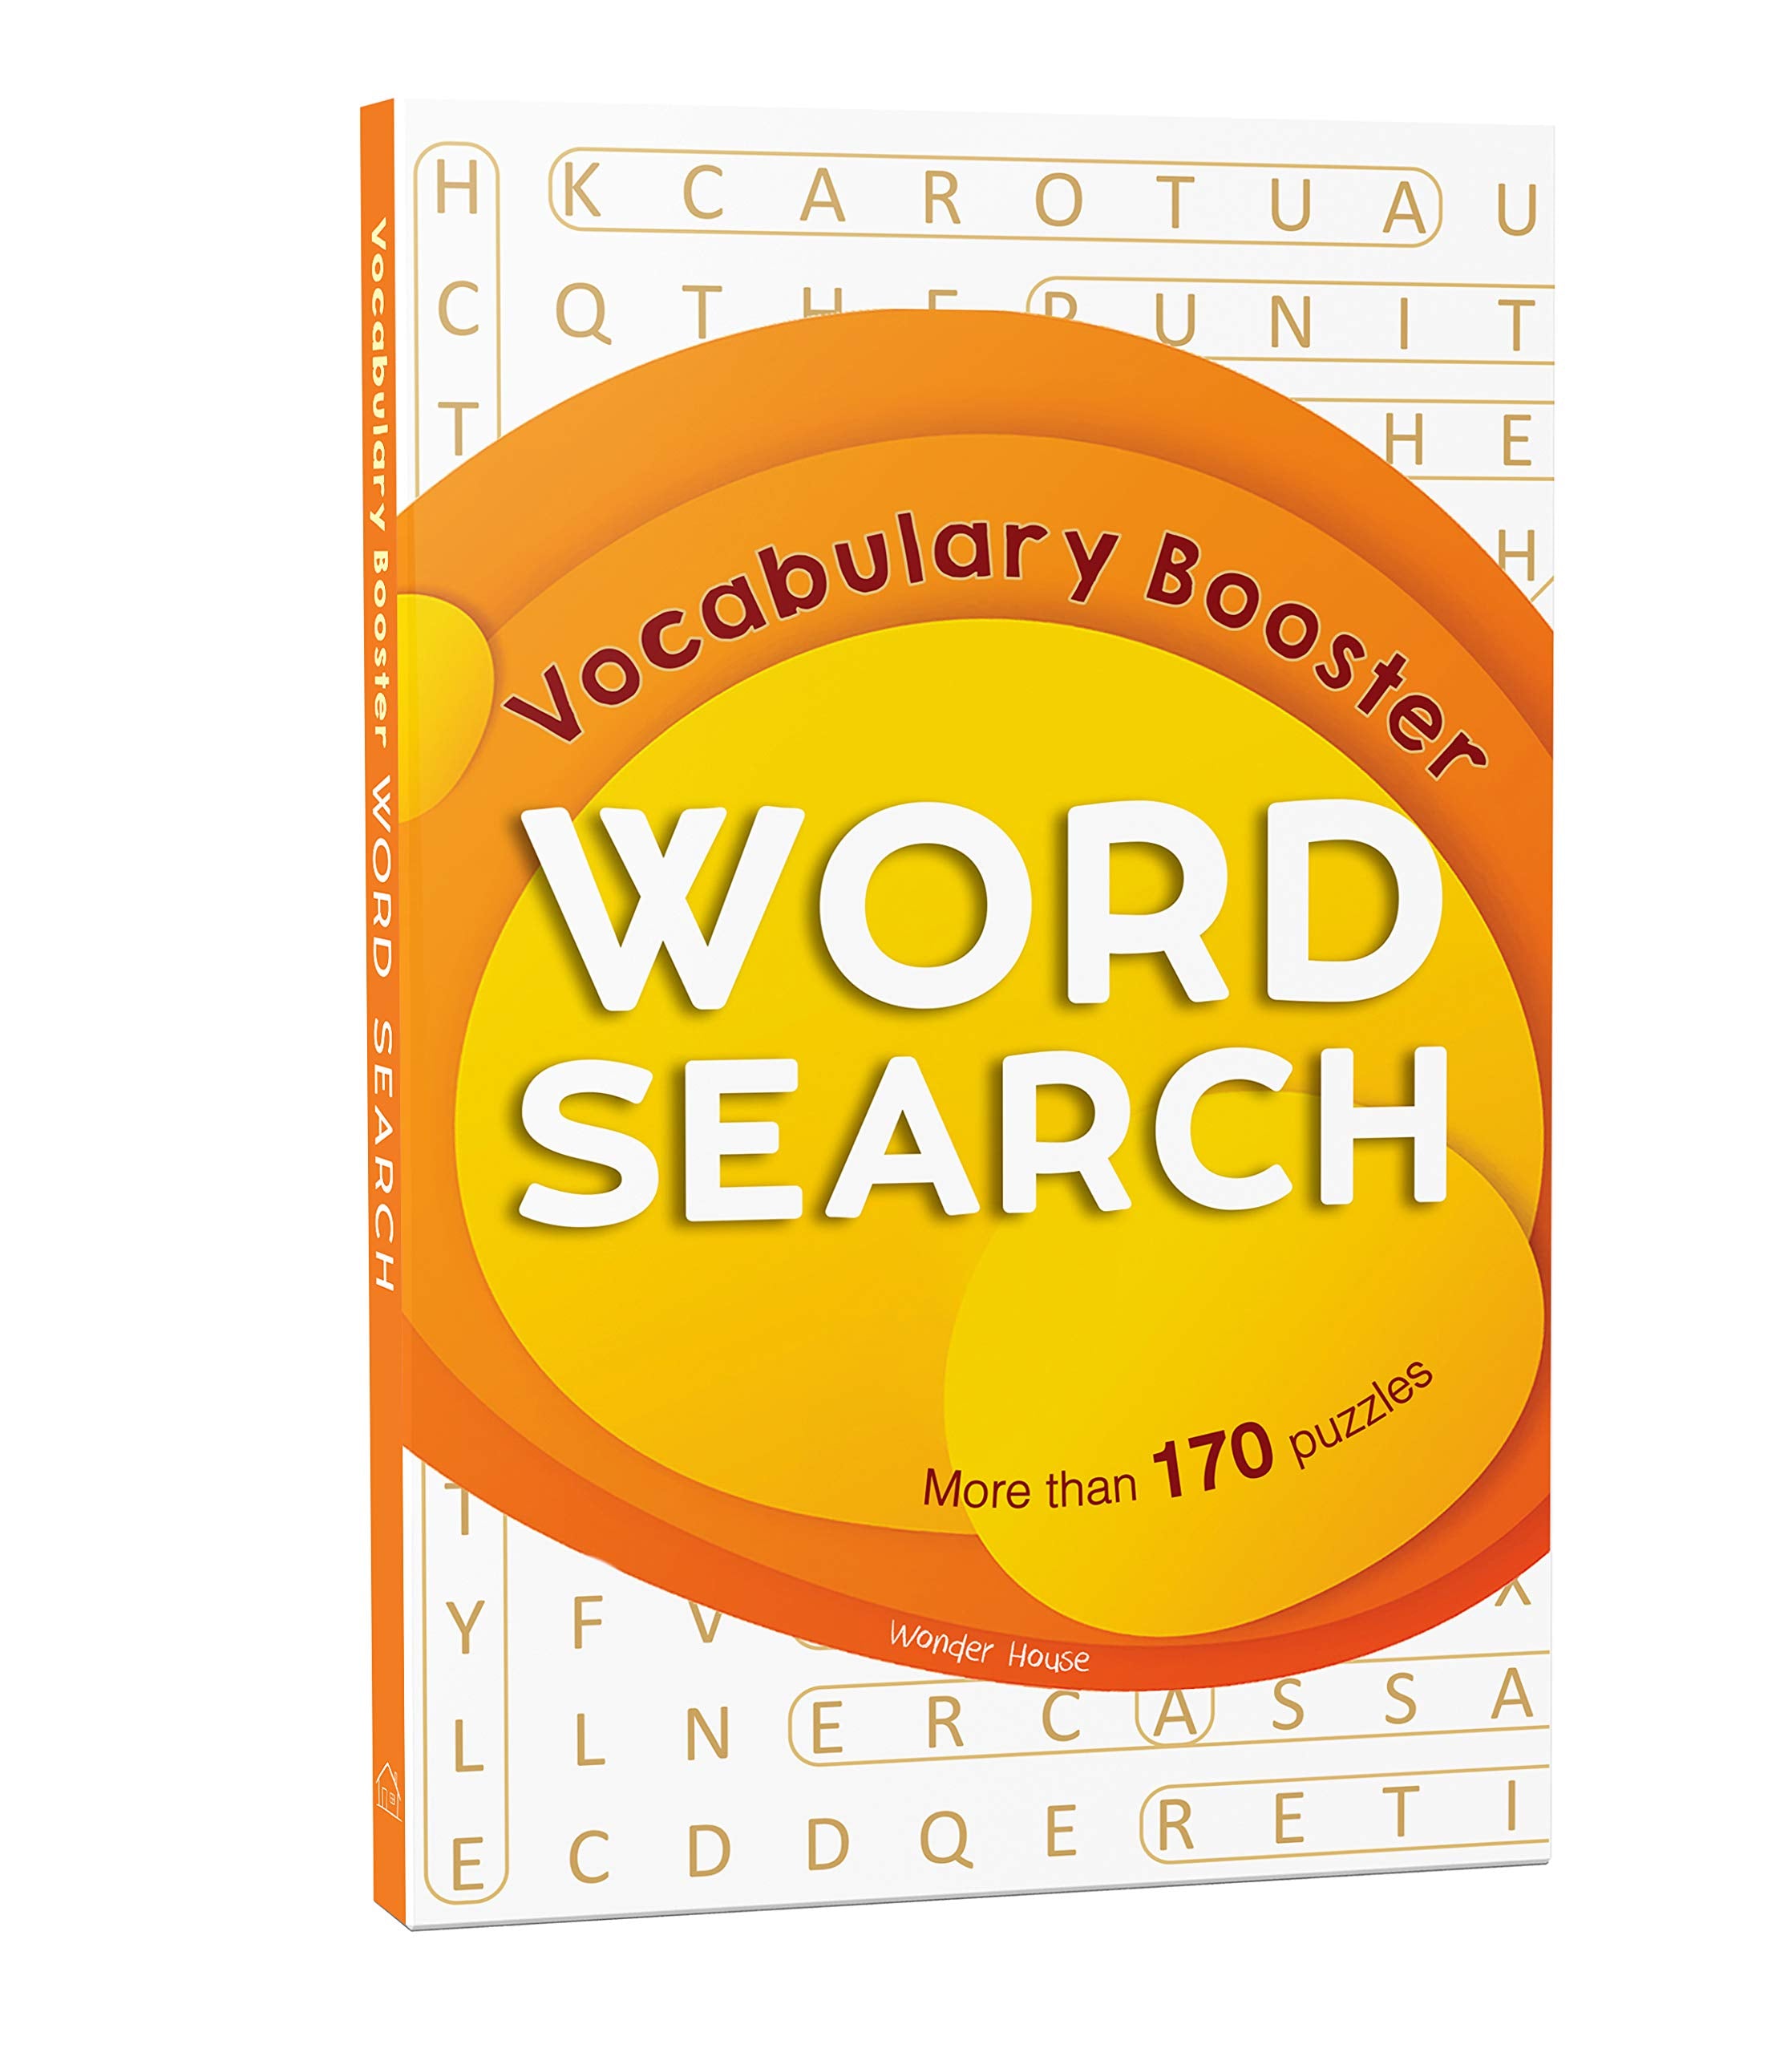 Word Search - Vocabulary Booster: Classic Word Puzzles For Everyone